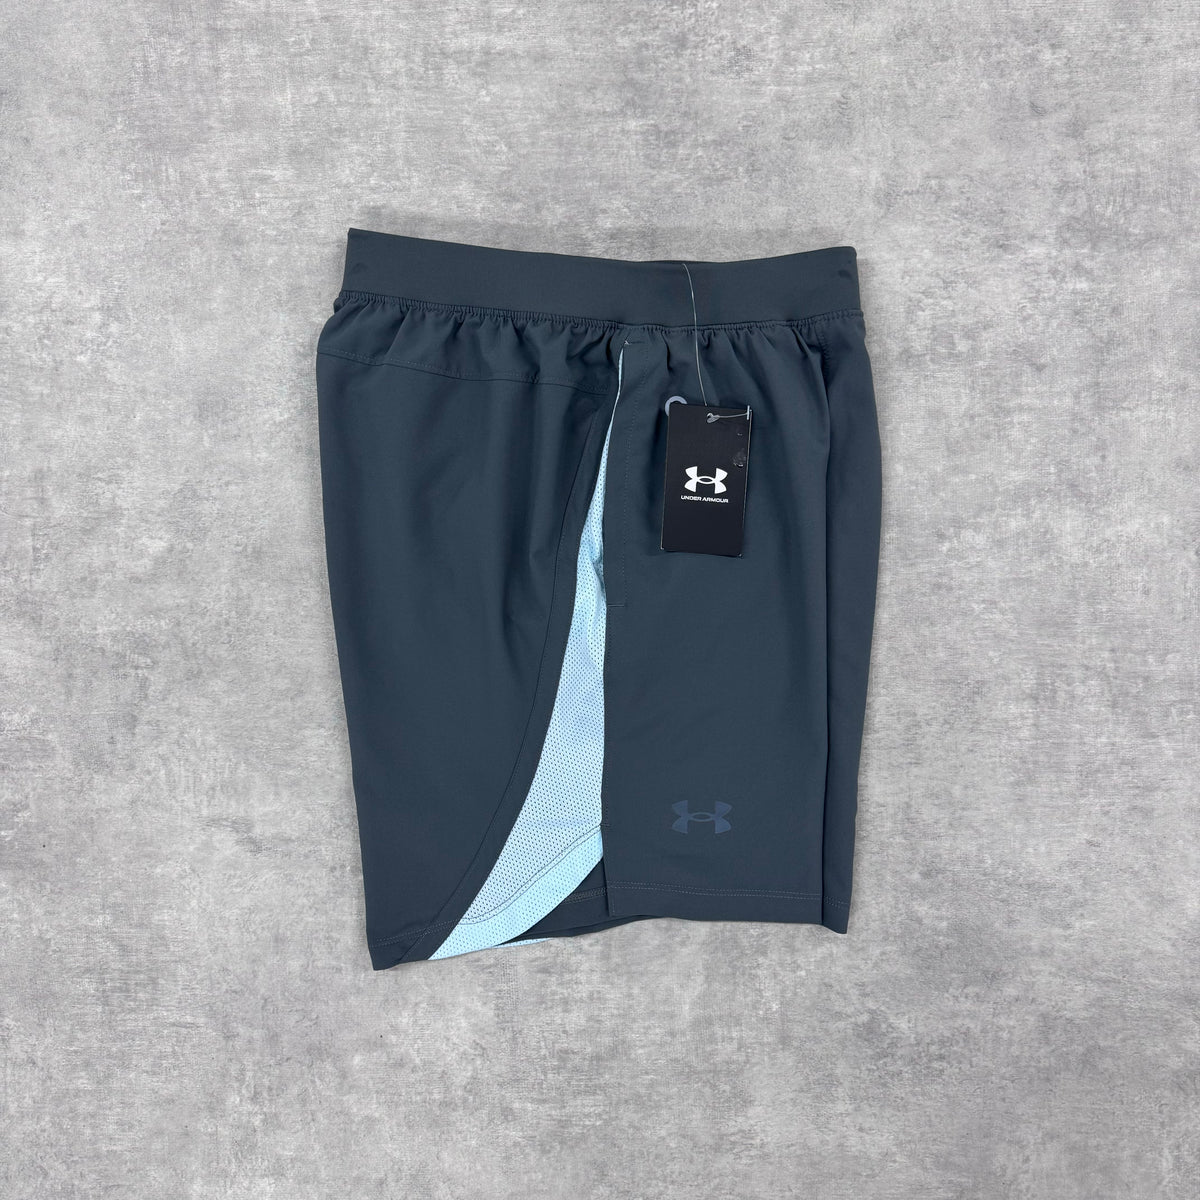 UNDER ARMOUR LAUNCH SHORTS 7” - GREY / SKY BLUE